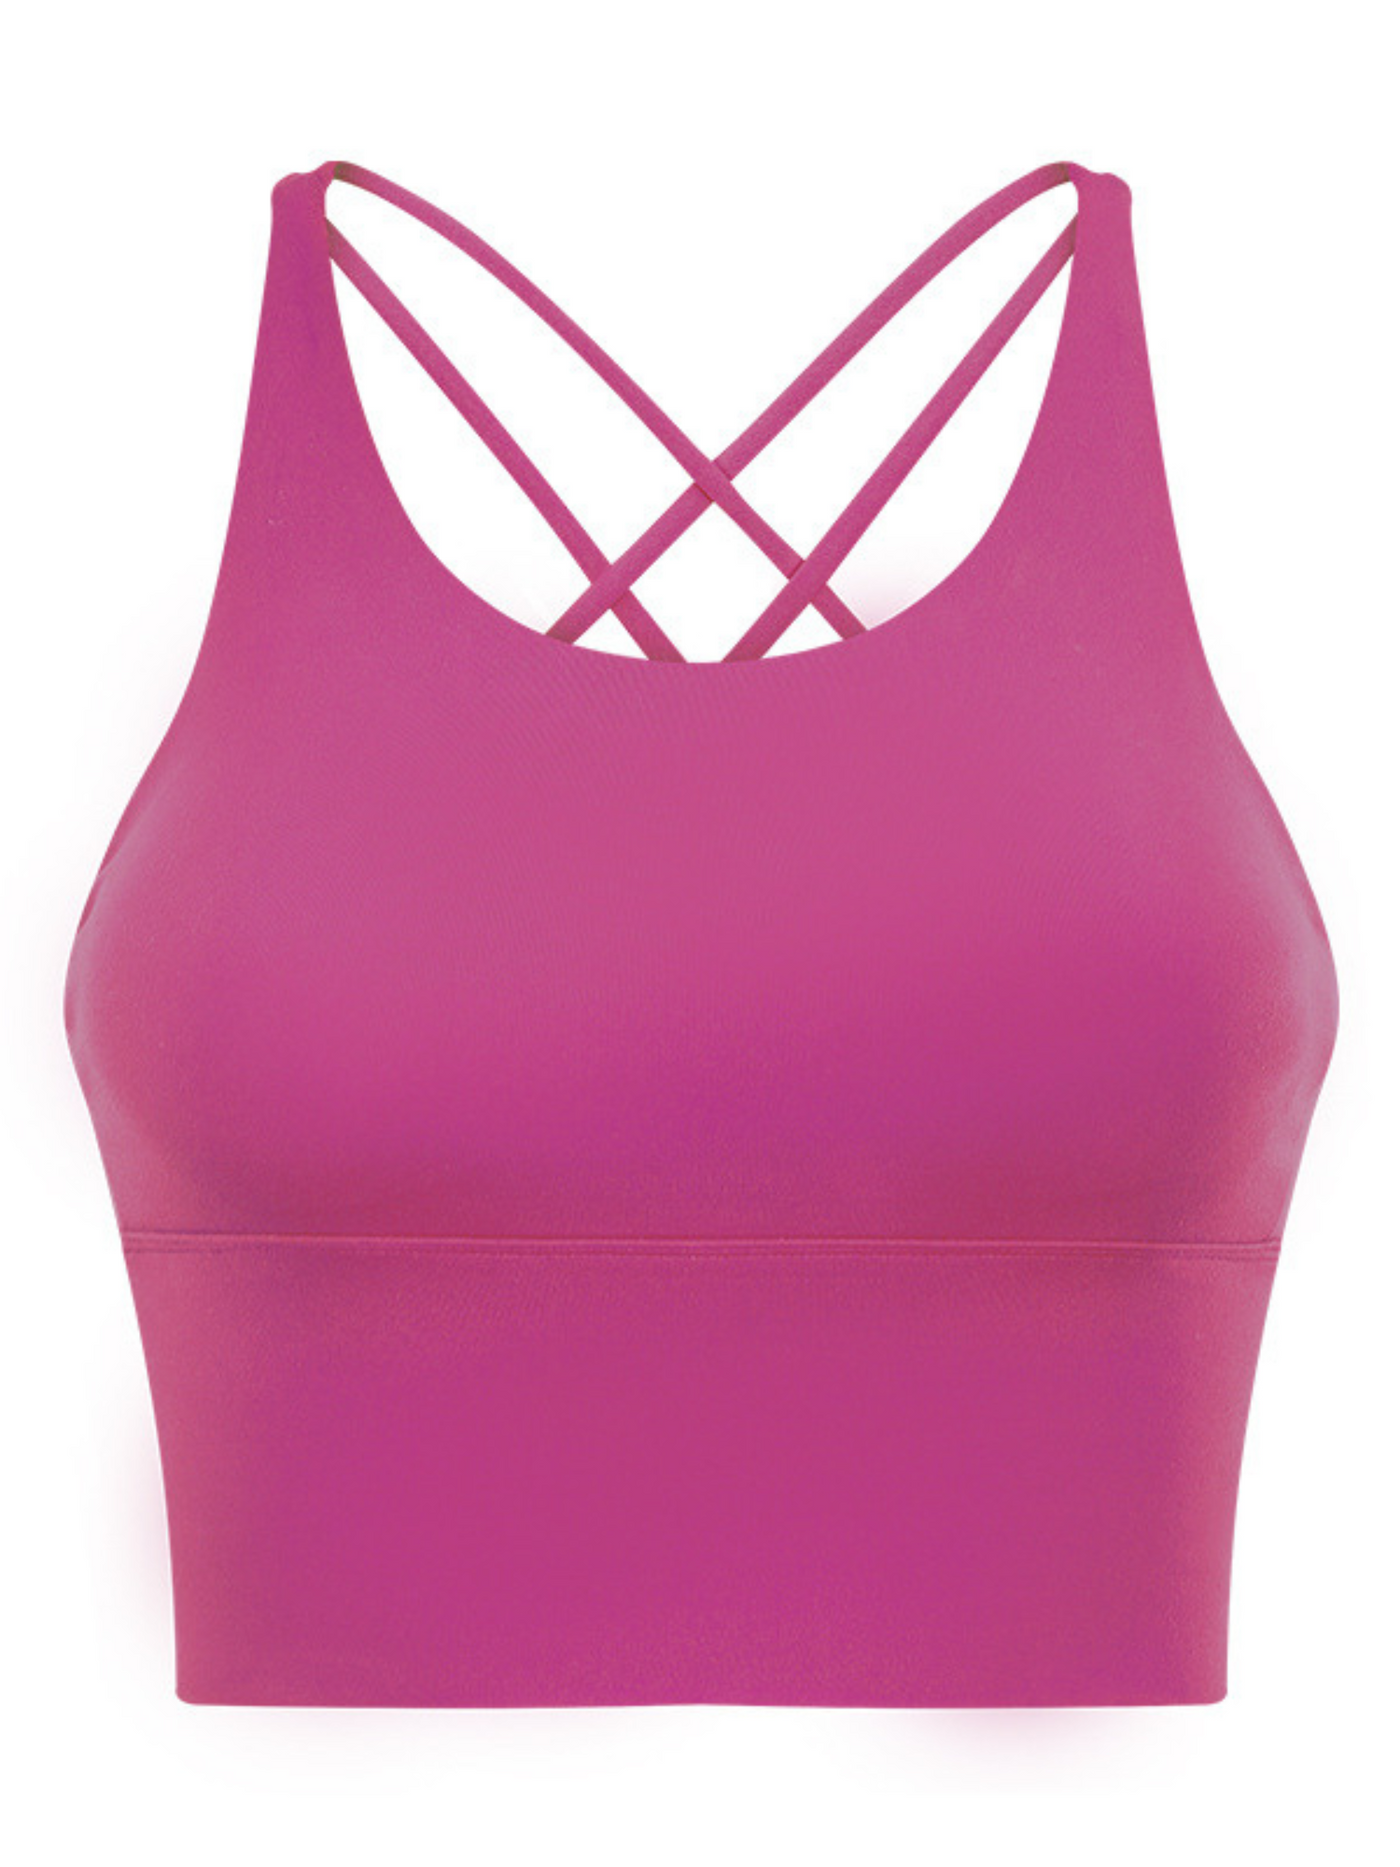 Navalora Fit Open Back High Neck Longline Women's Sports Bra in Lychee Pink with Anchor Logo 